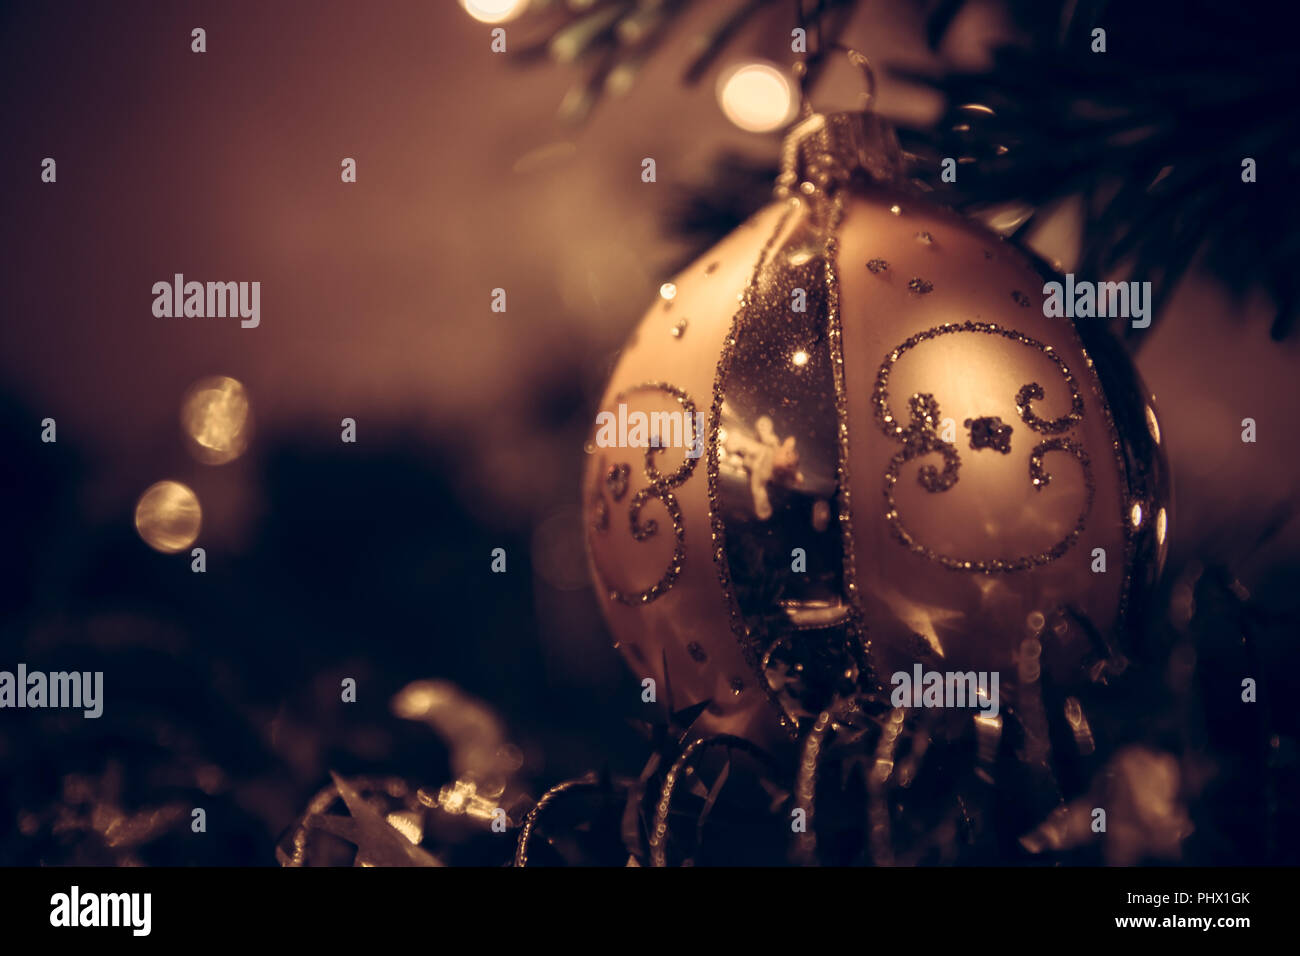 Vintage Christmas background with Christmas ball in dark golden colors Stock Photo